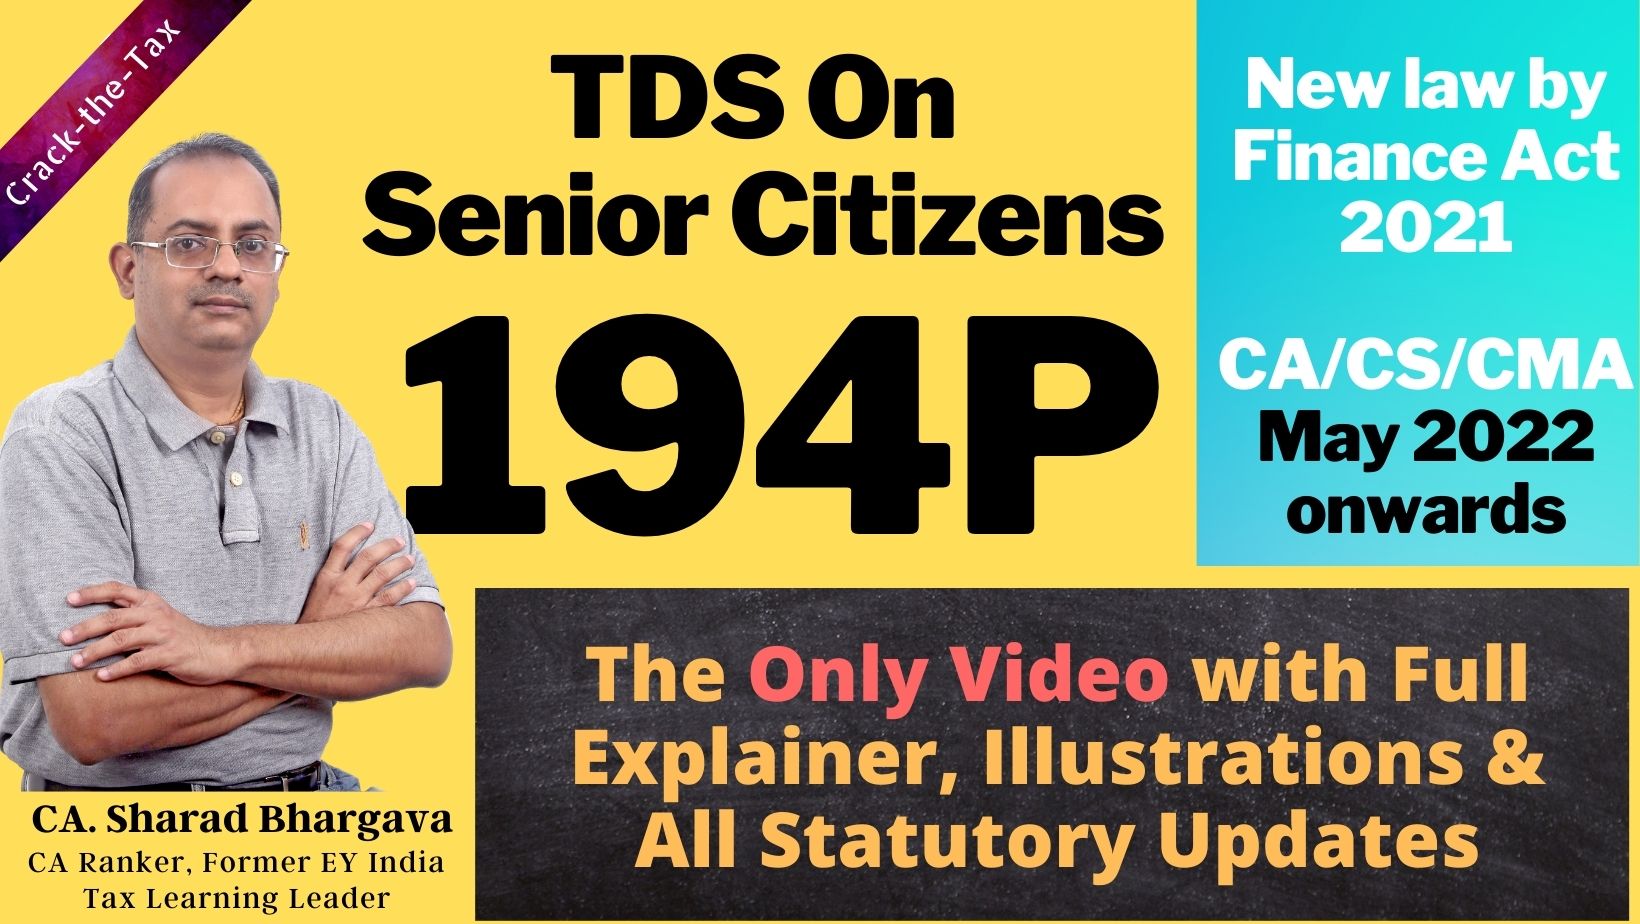 TDS u/s 194P on Senior Citizens // New law by Finance Act 2021 // By CA. Sharad Bhargava